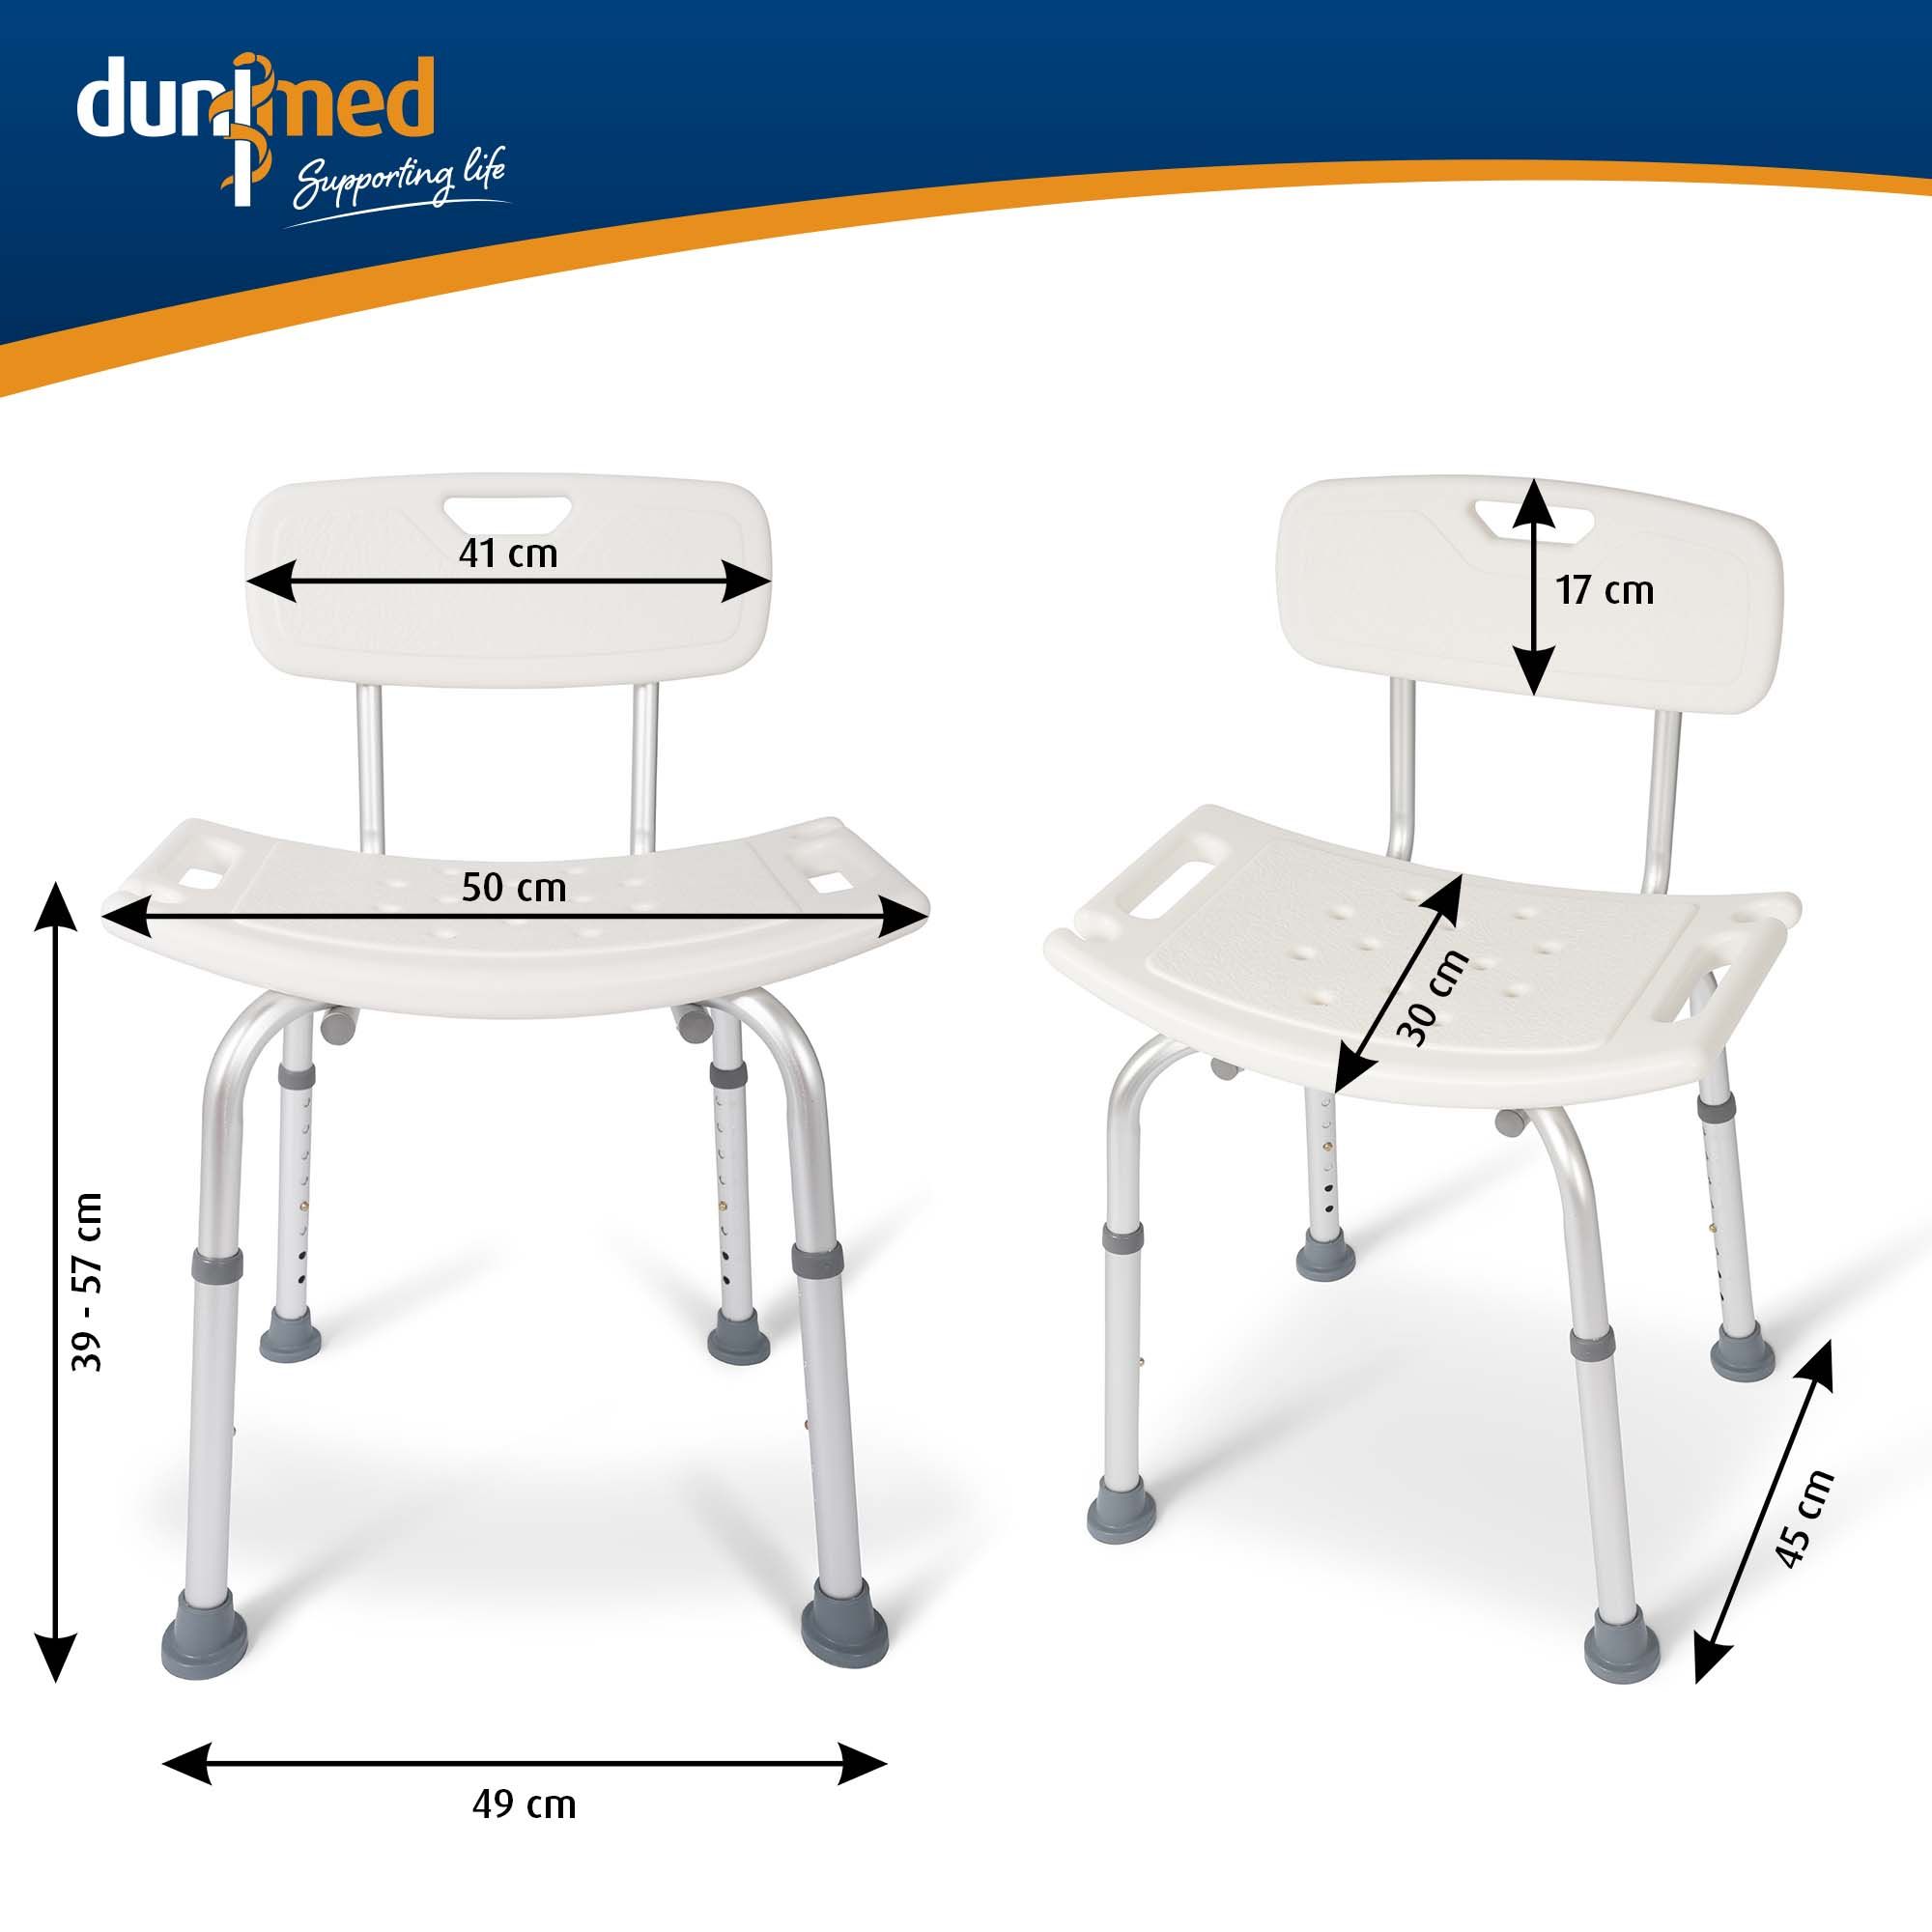 dunimed shower chair with backrest size chart